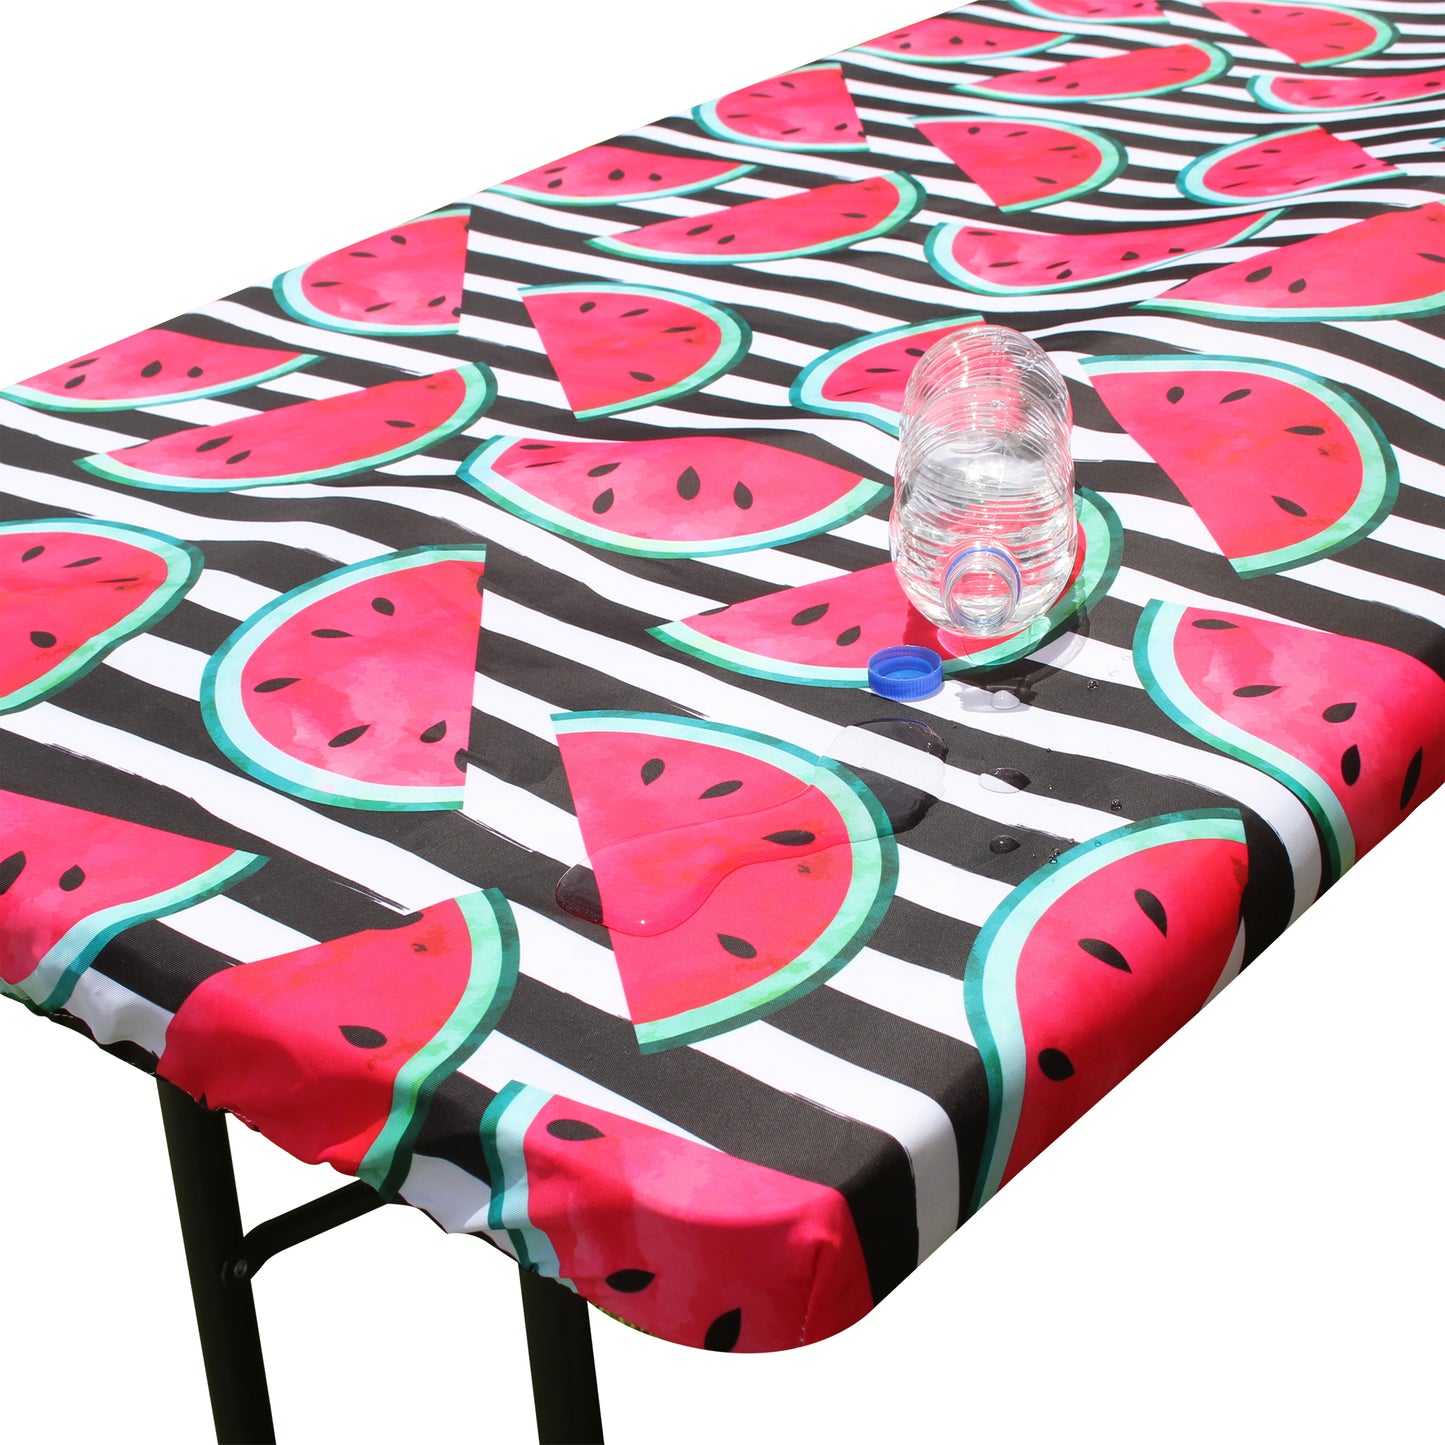 TableCloth PLUS 72" Watermelon Fitted PEVA Vinyl Tablecloth for 6' Folding Tables is easy to clean, water proof, easy to install, and has an elastic rim